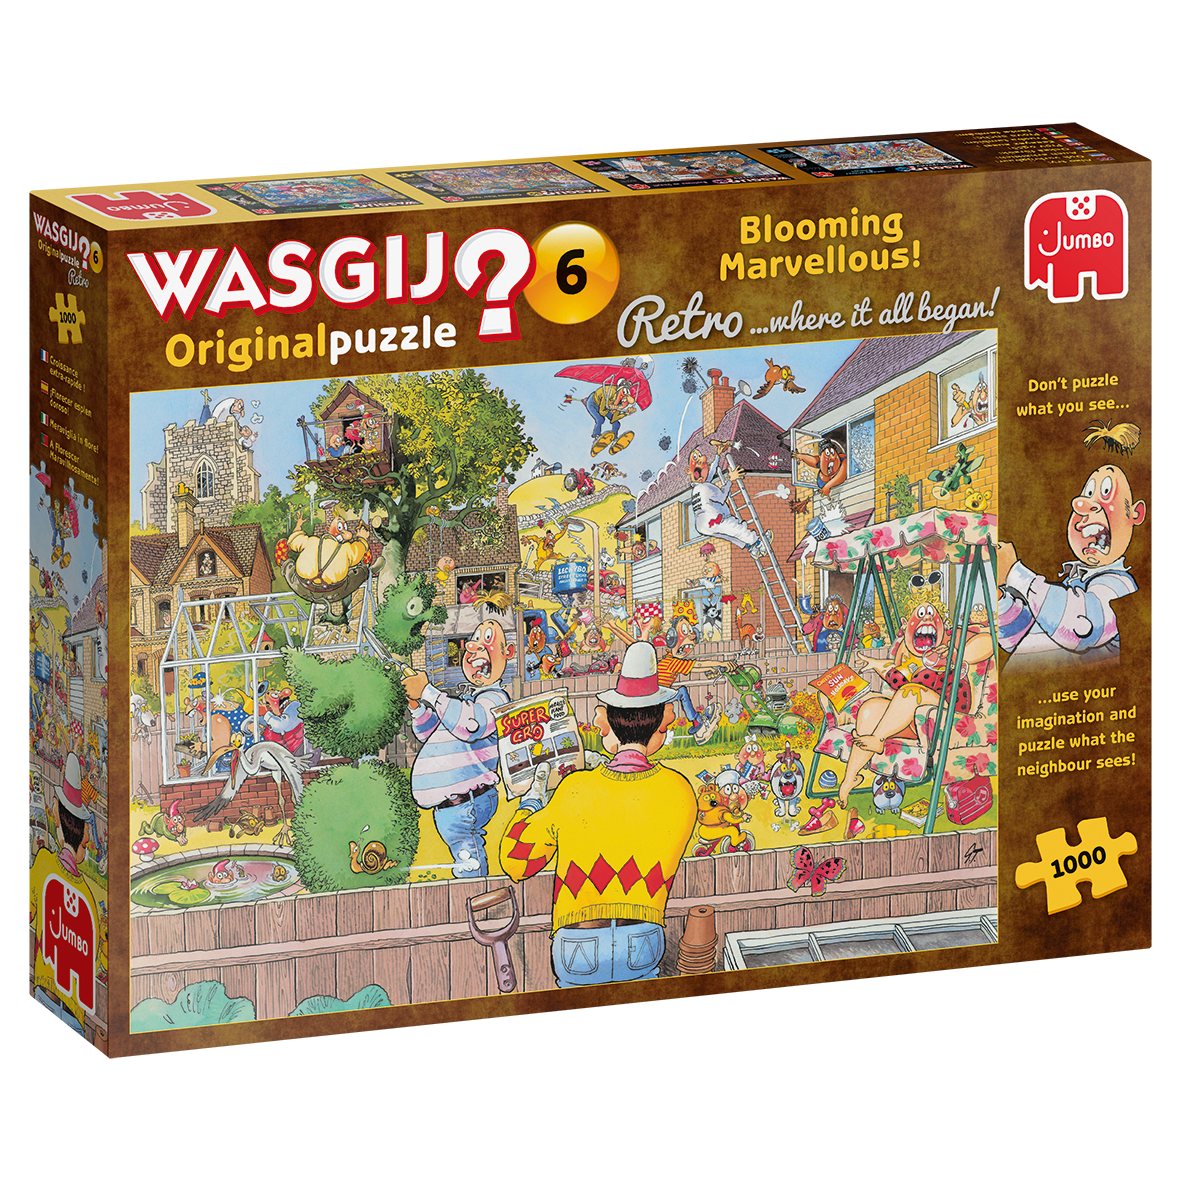 WASGIJ? 1000 piece jigsaw puzzles from reverse perspective.